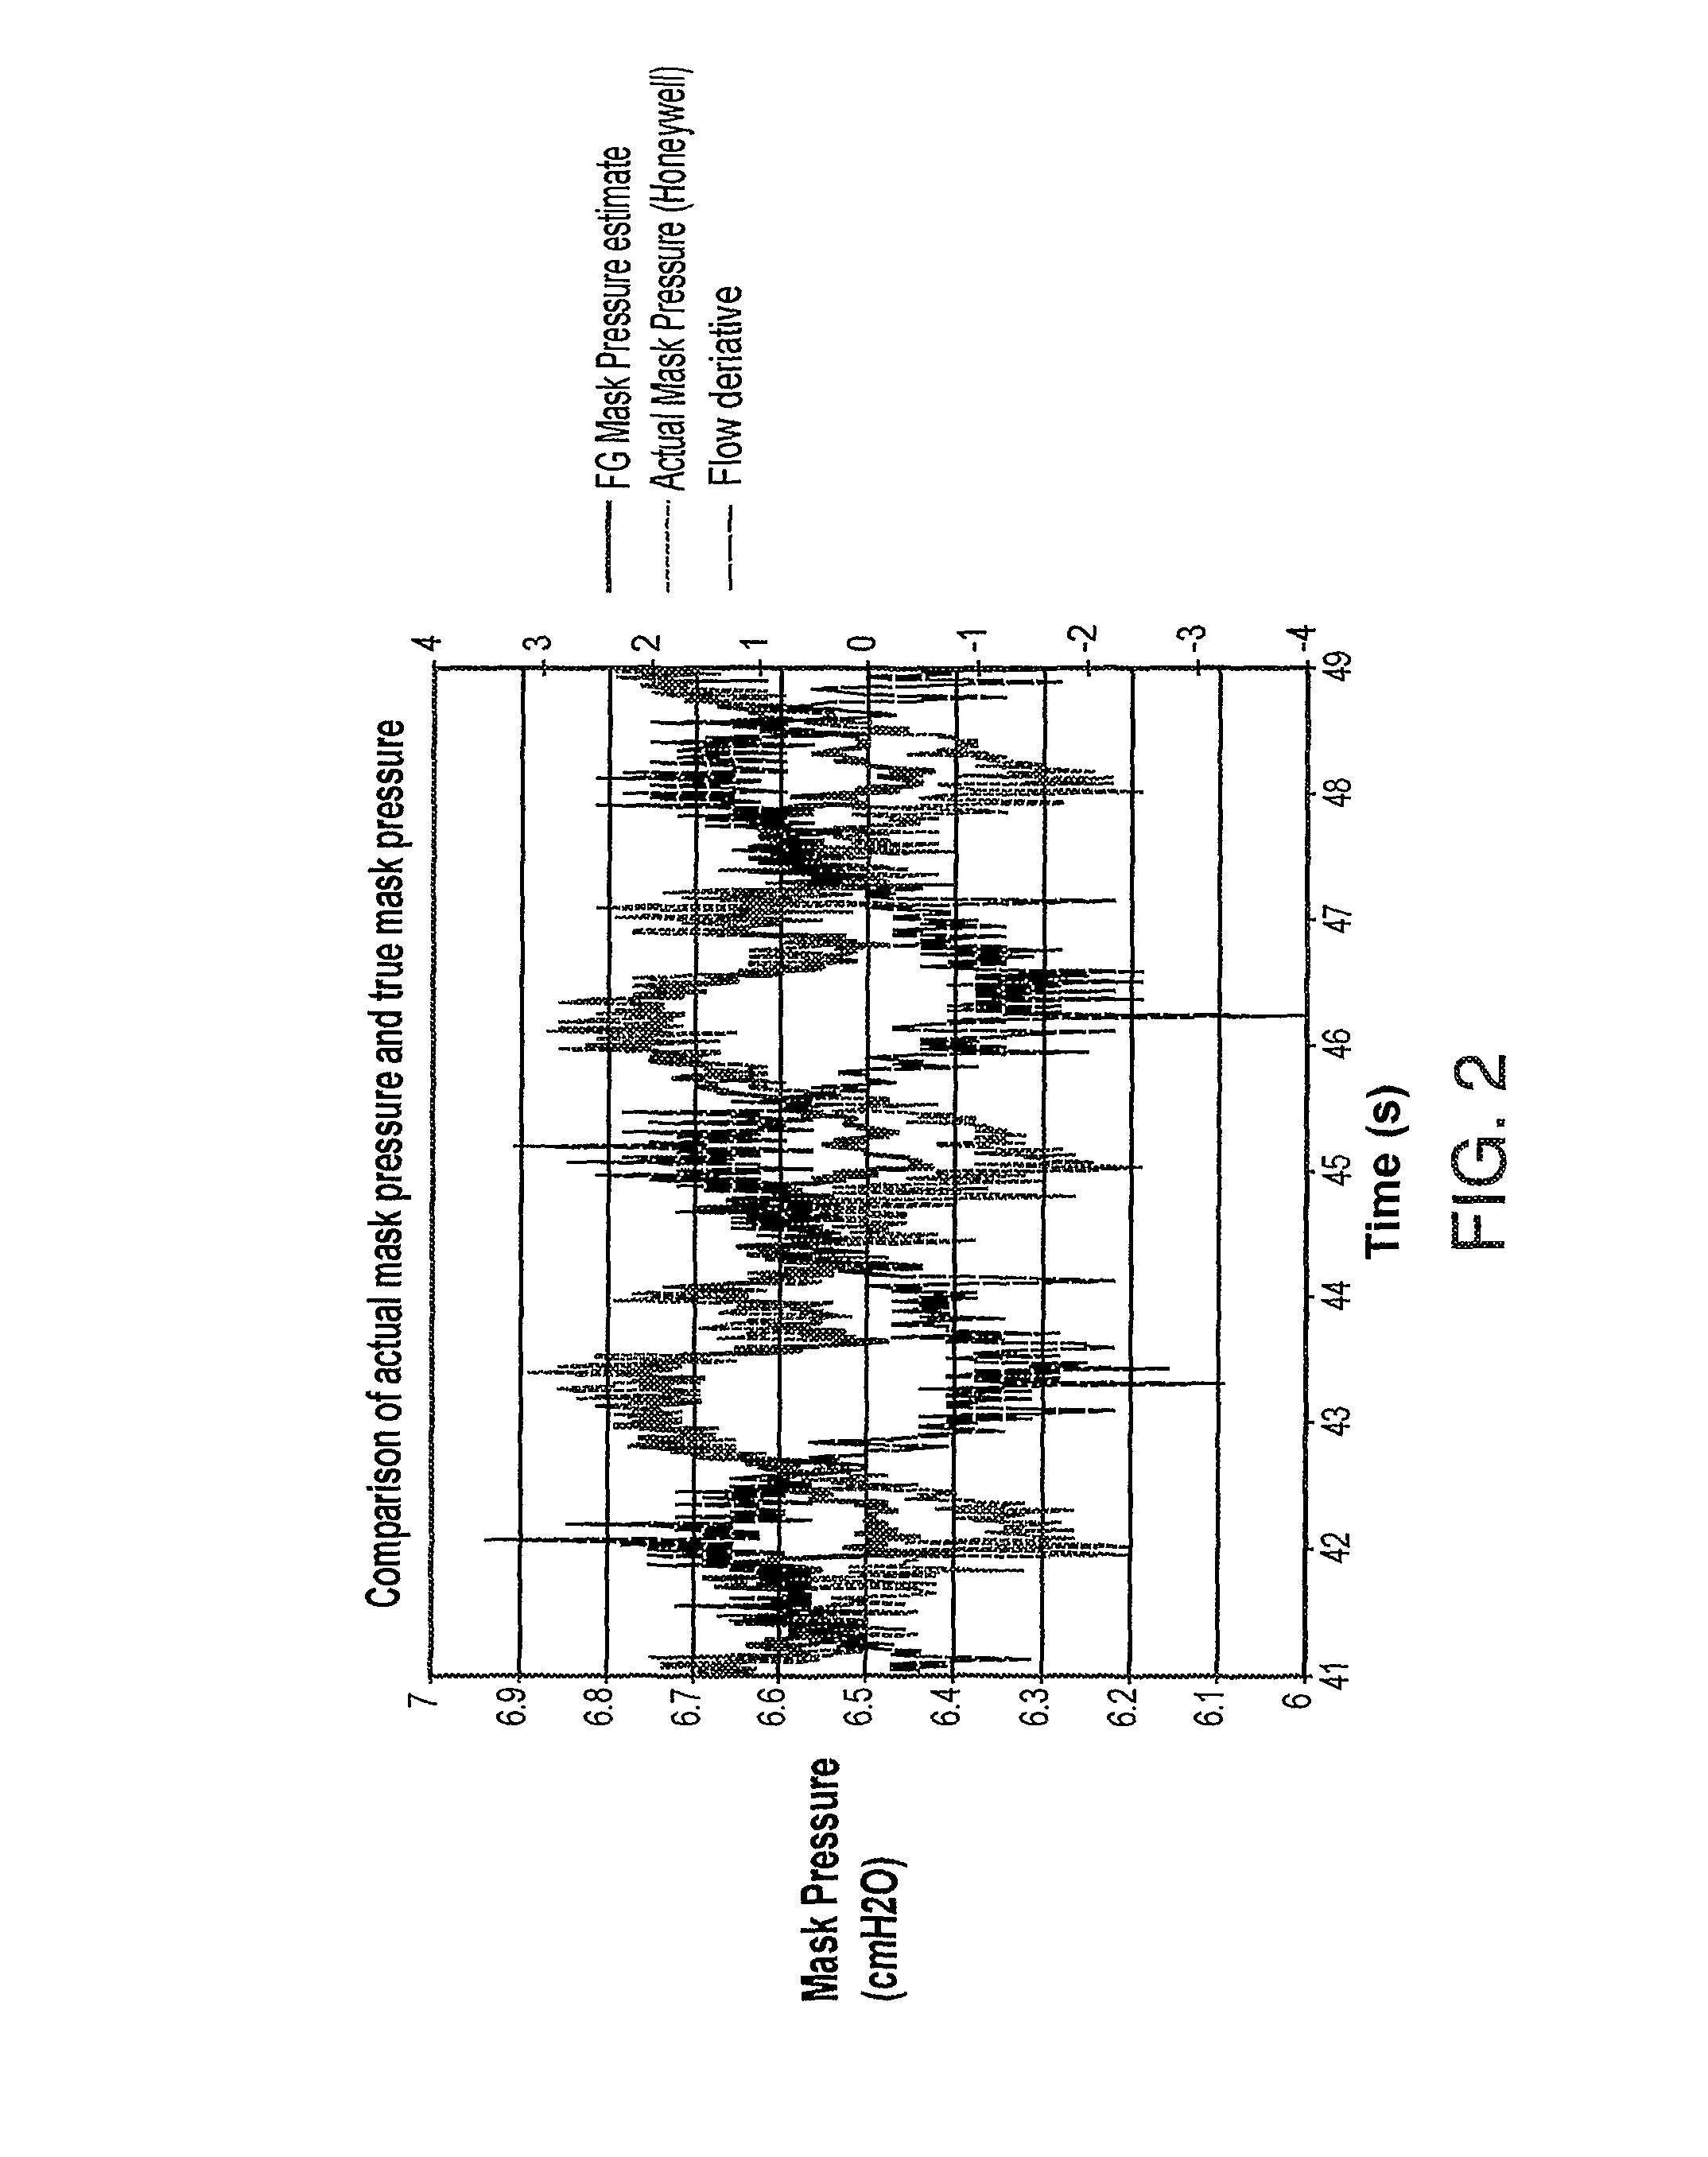 Method and apparatus for improving flow and pressure estimation in CPAP systems